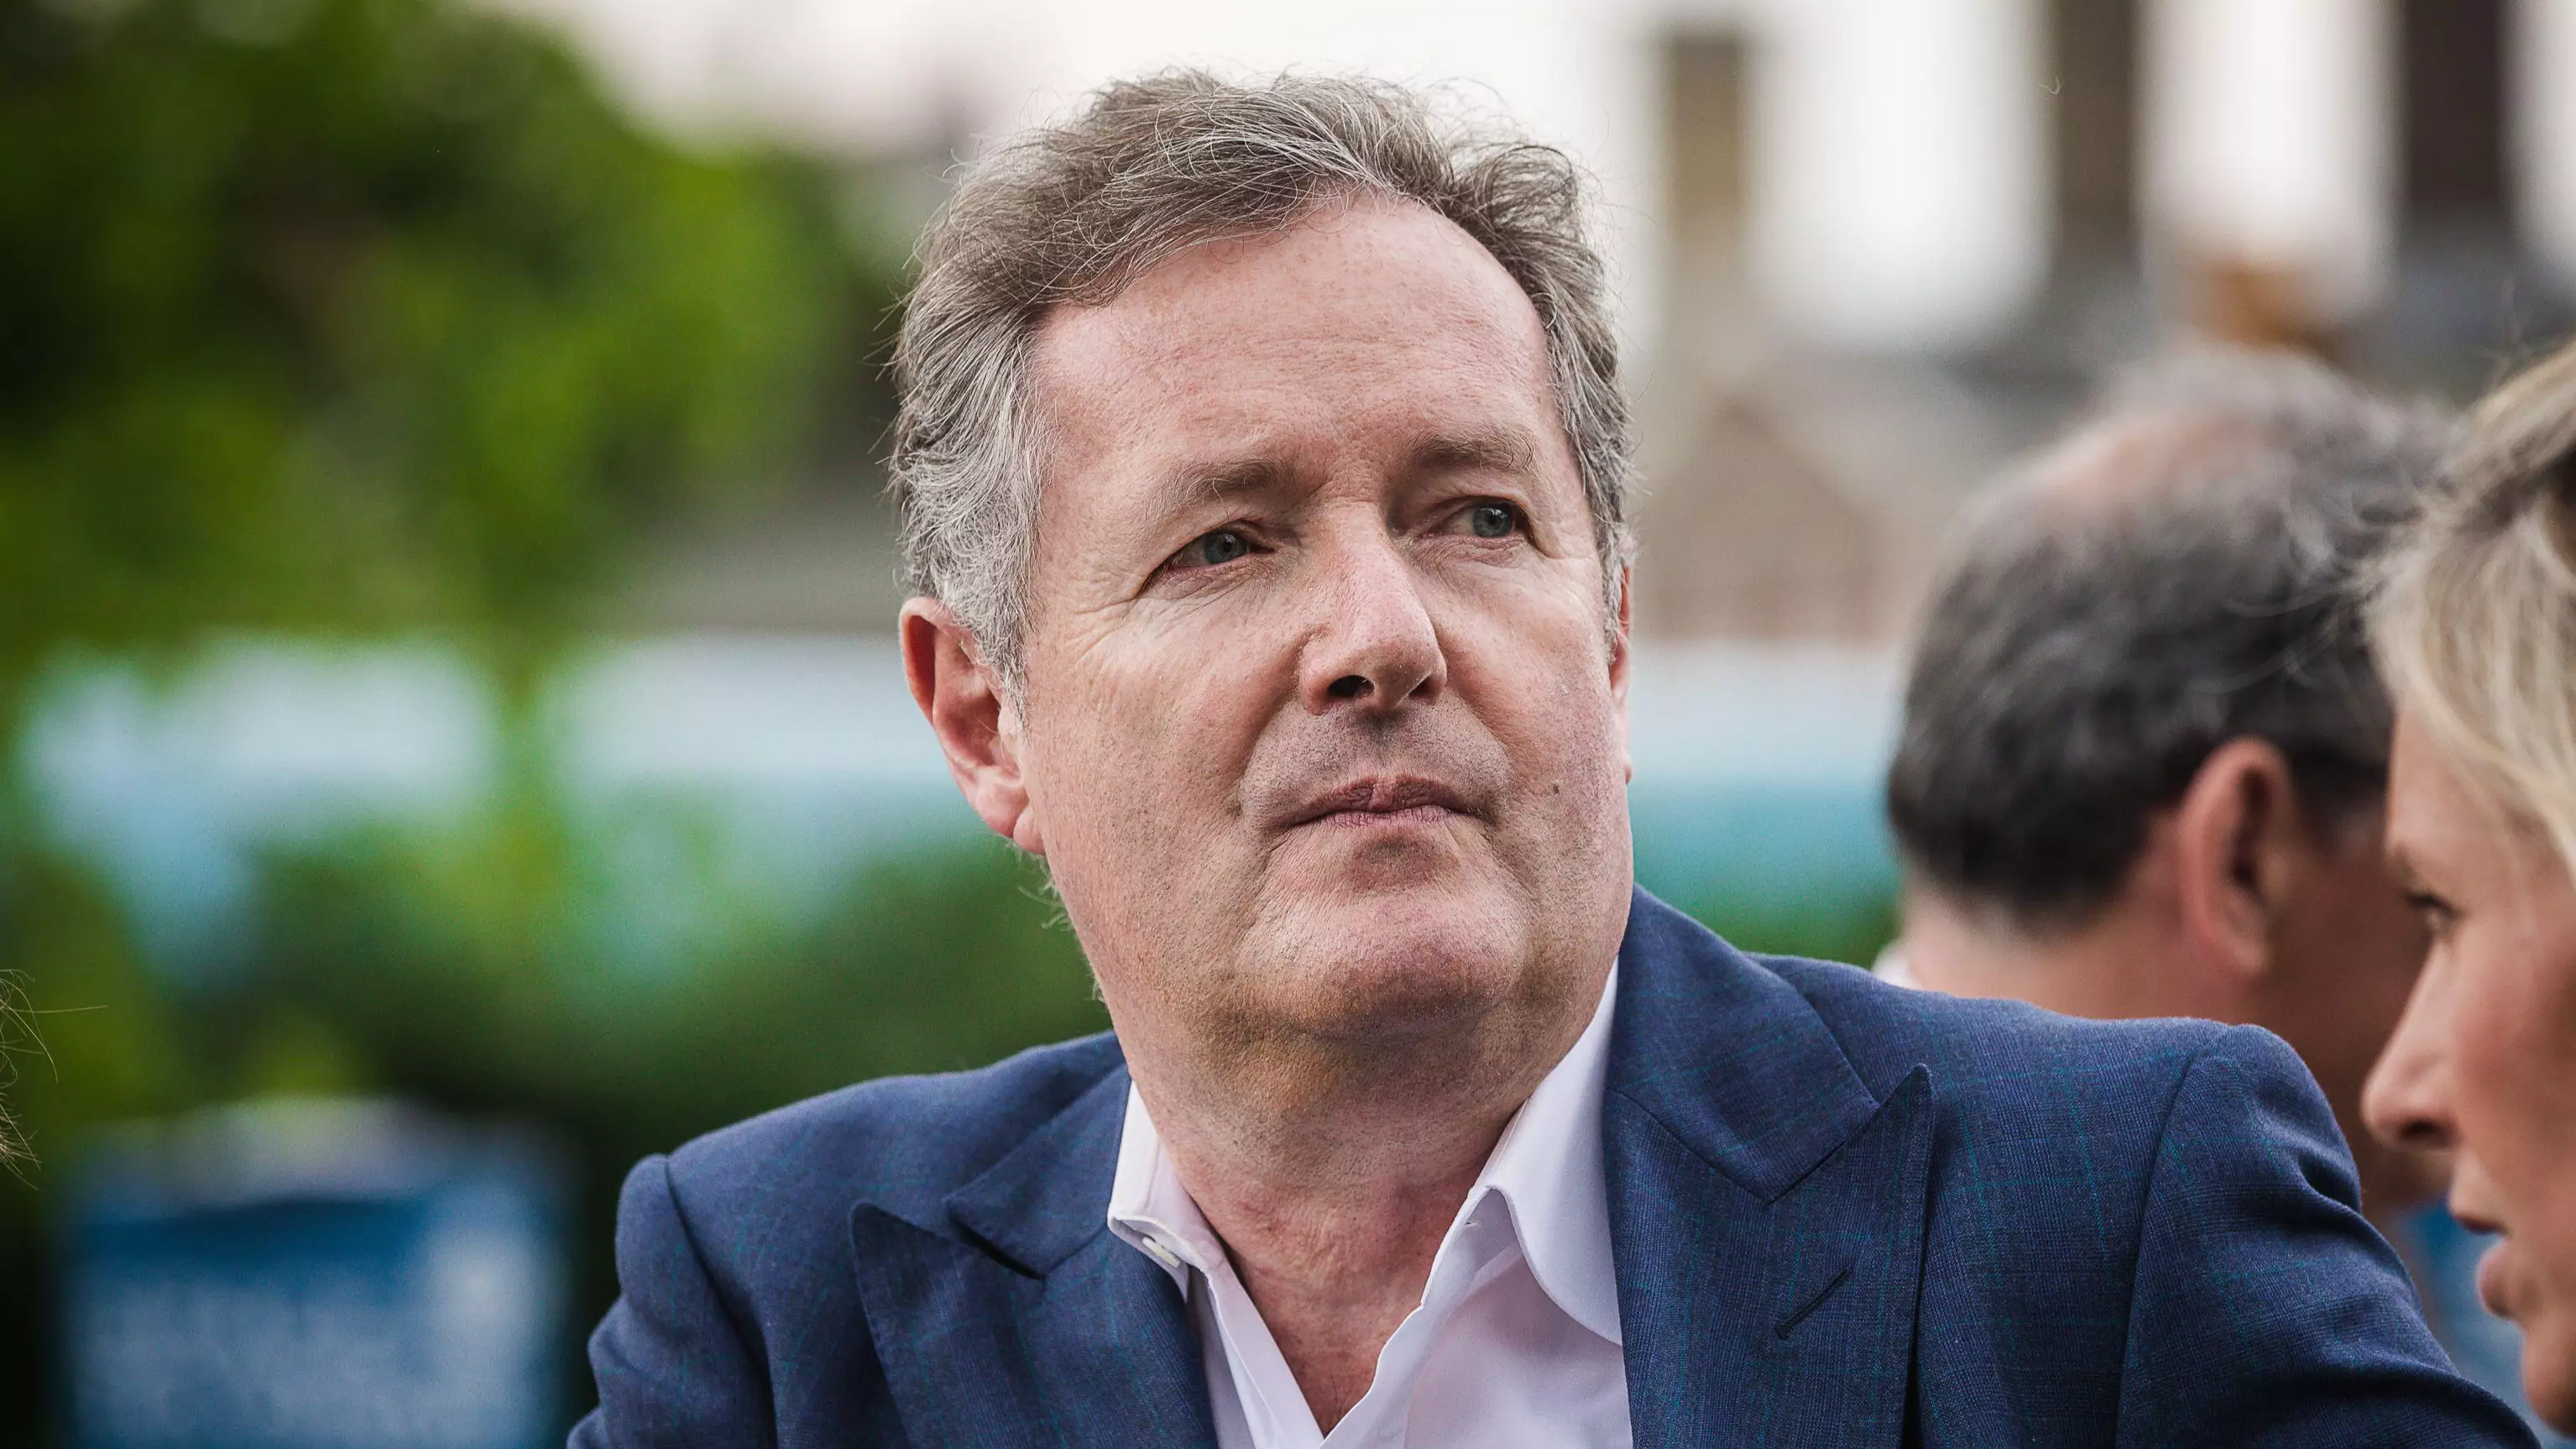 Piers Morgan Fears 'There's Something We're Not Being Told About Queen's Health'